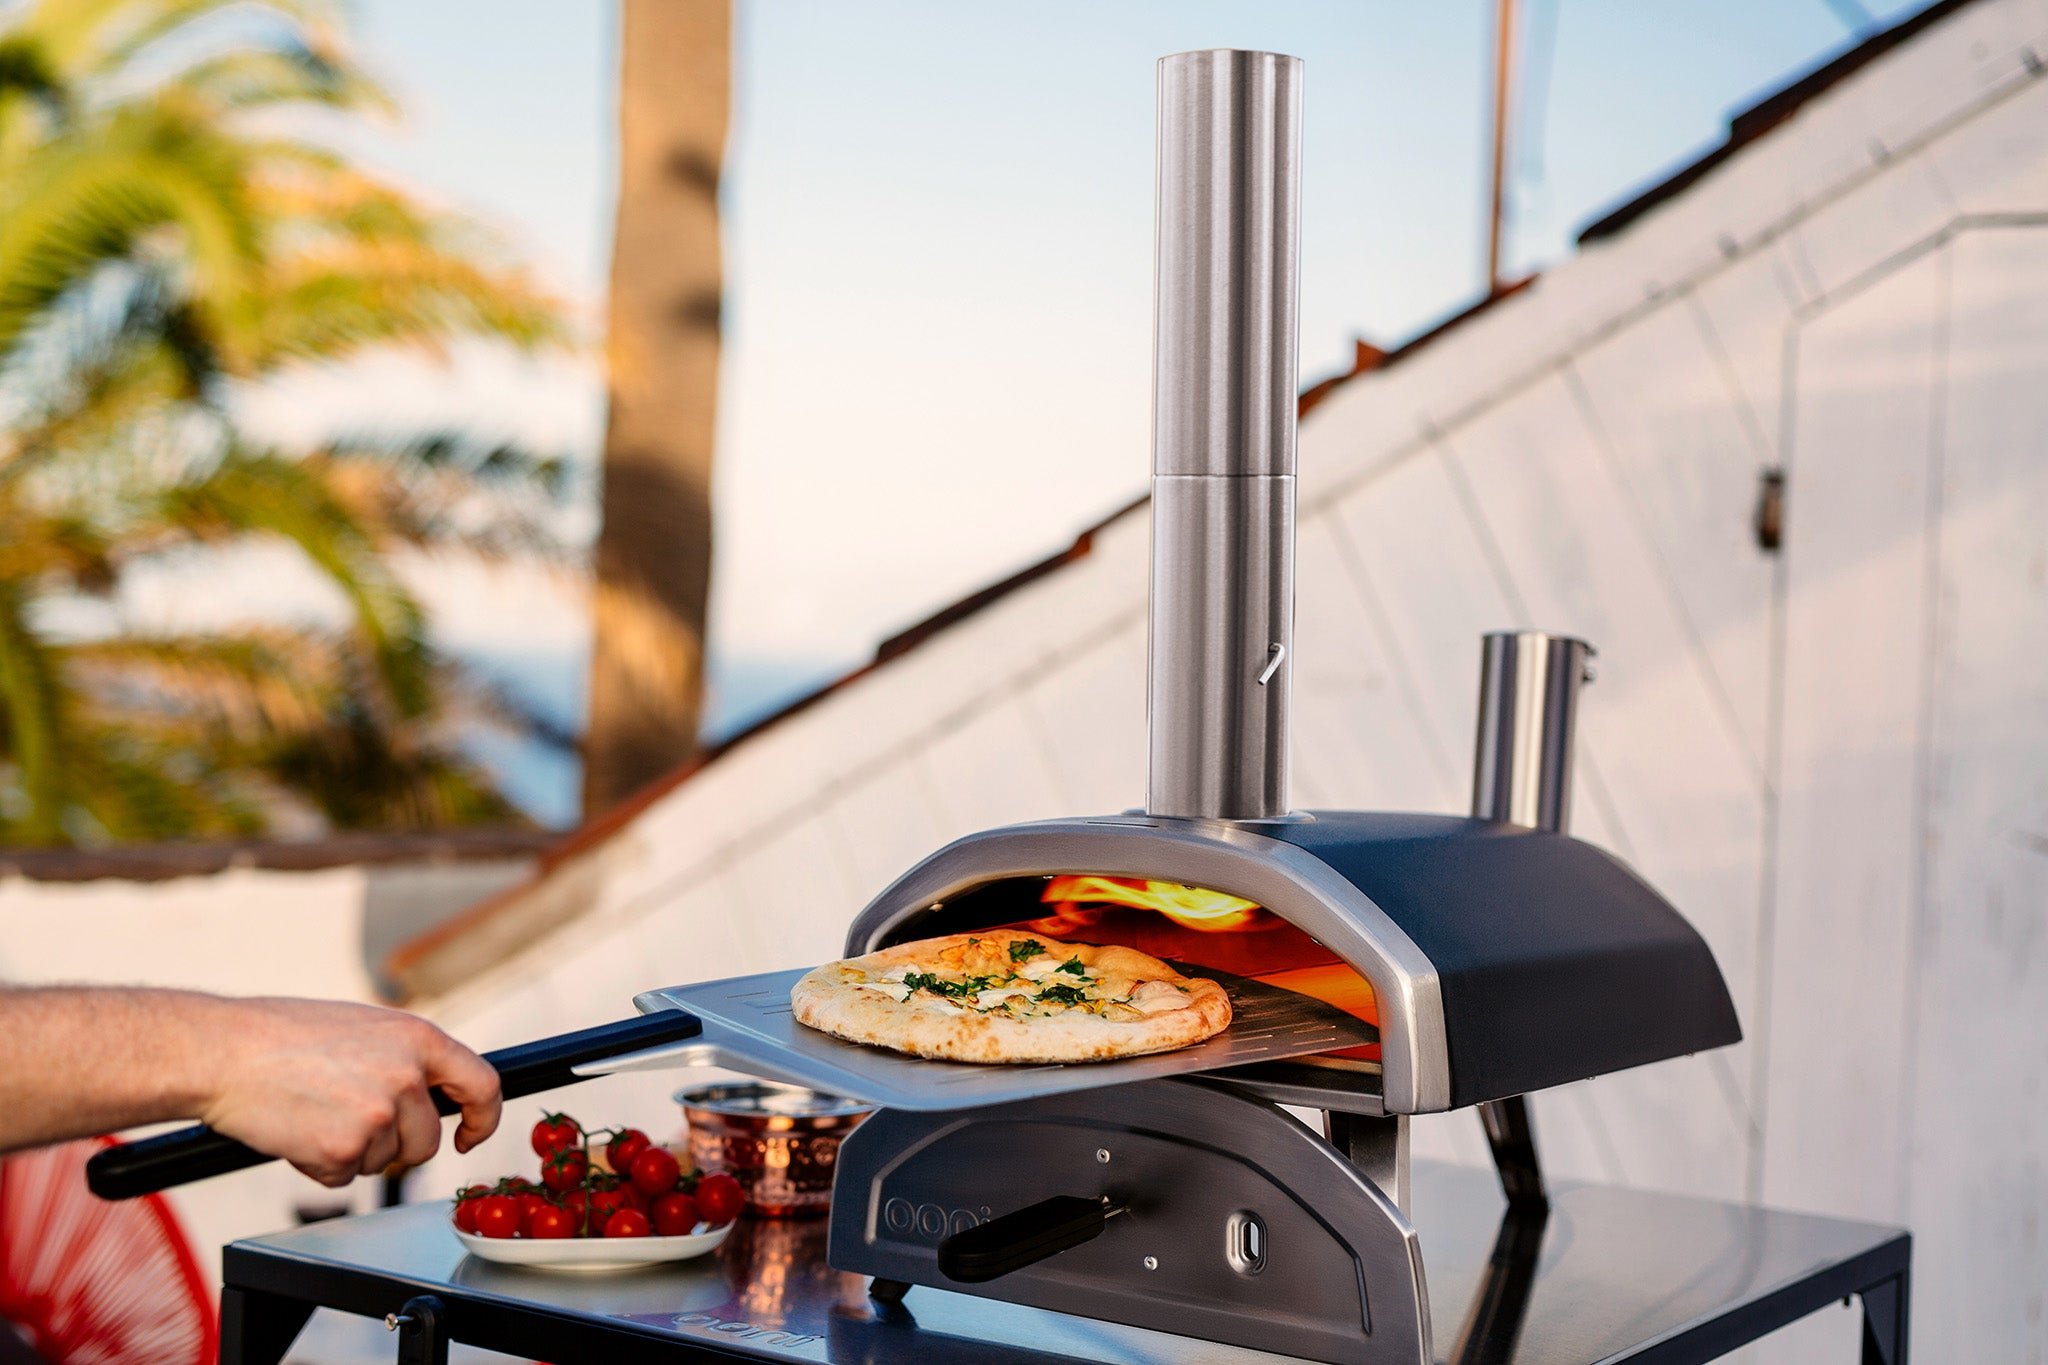 Portable Stainless Steel Pizza Maker for Outdoor use MFSTUDIO 12 Wood Pellet Outdoor Pizza Oven 